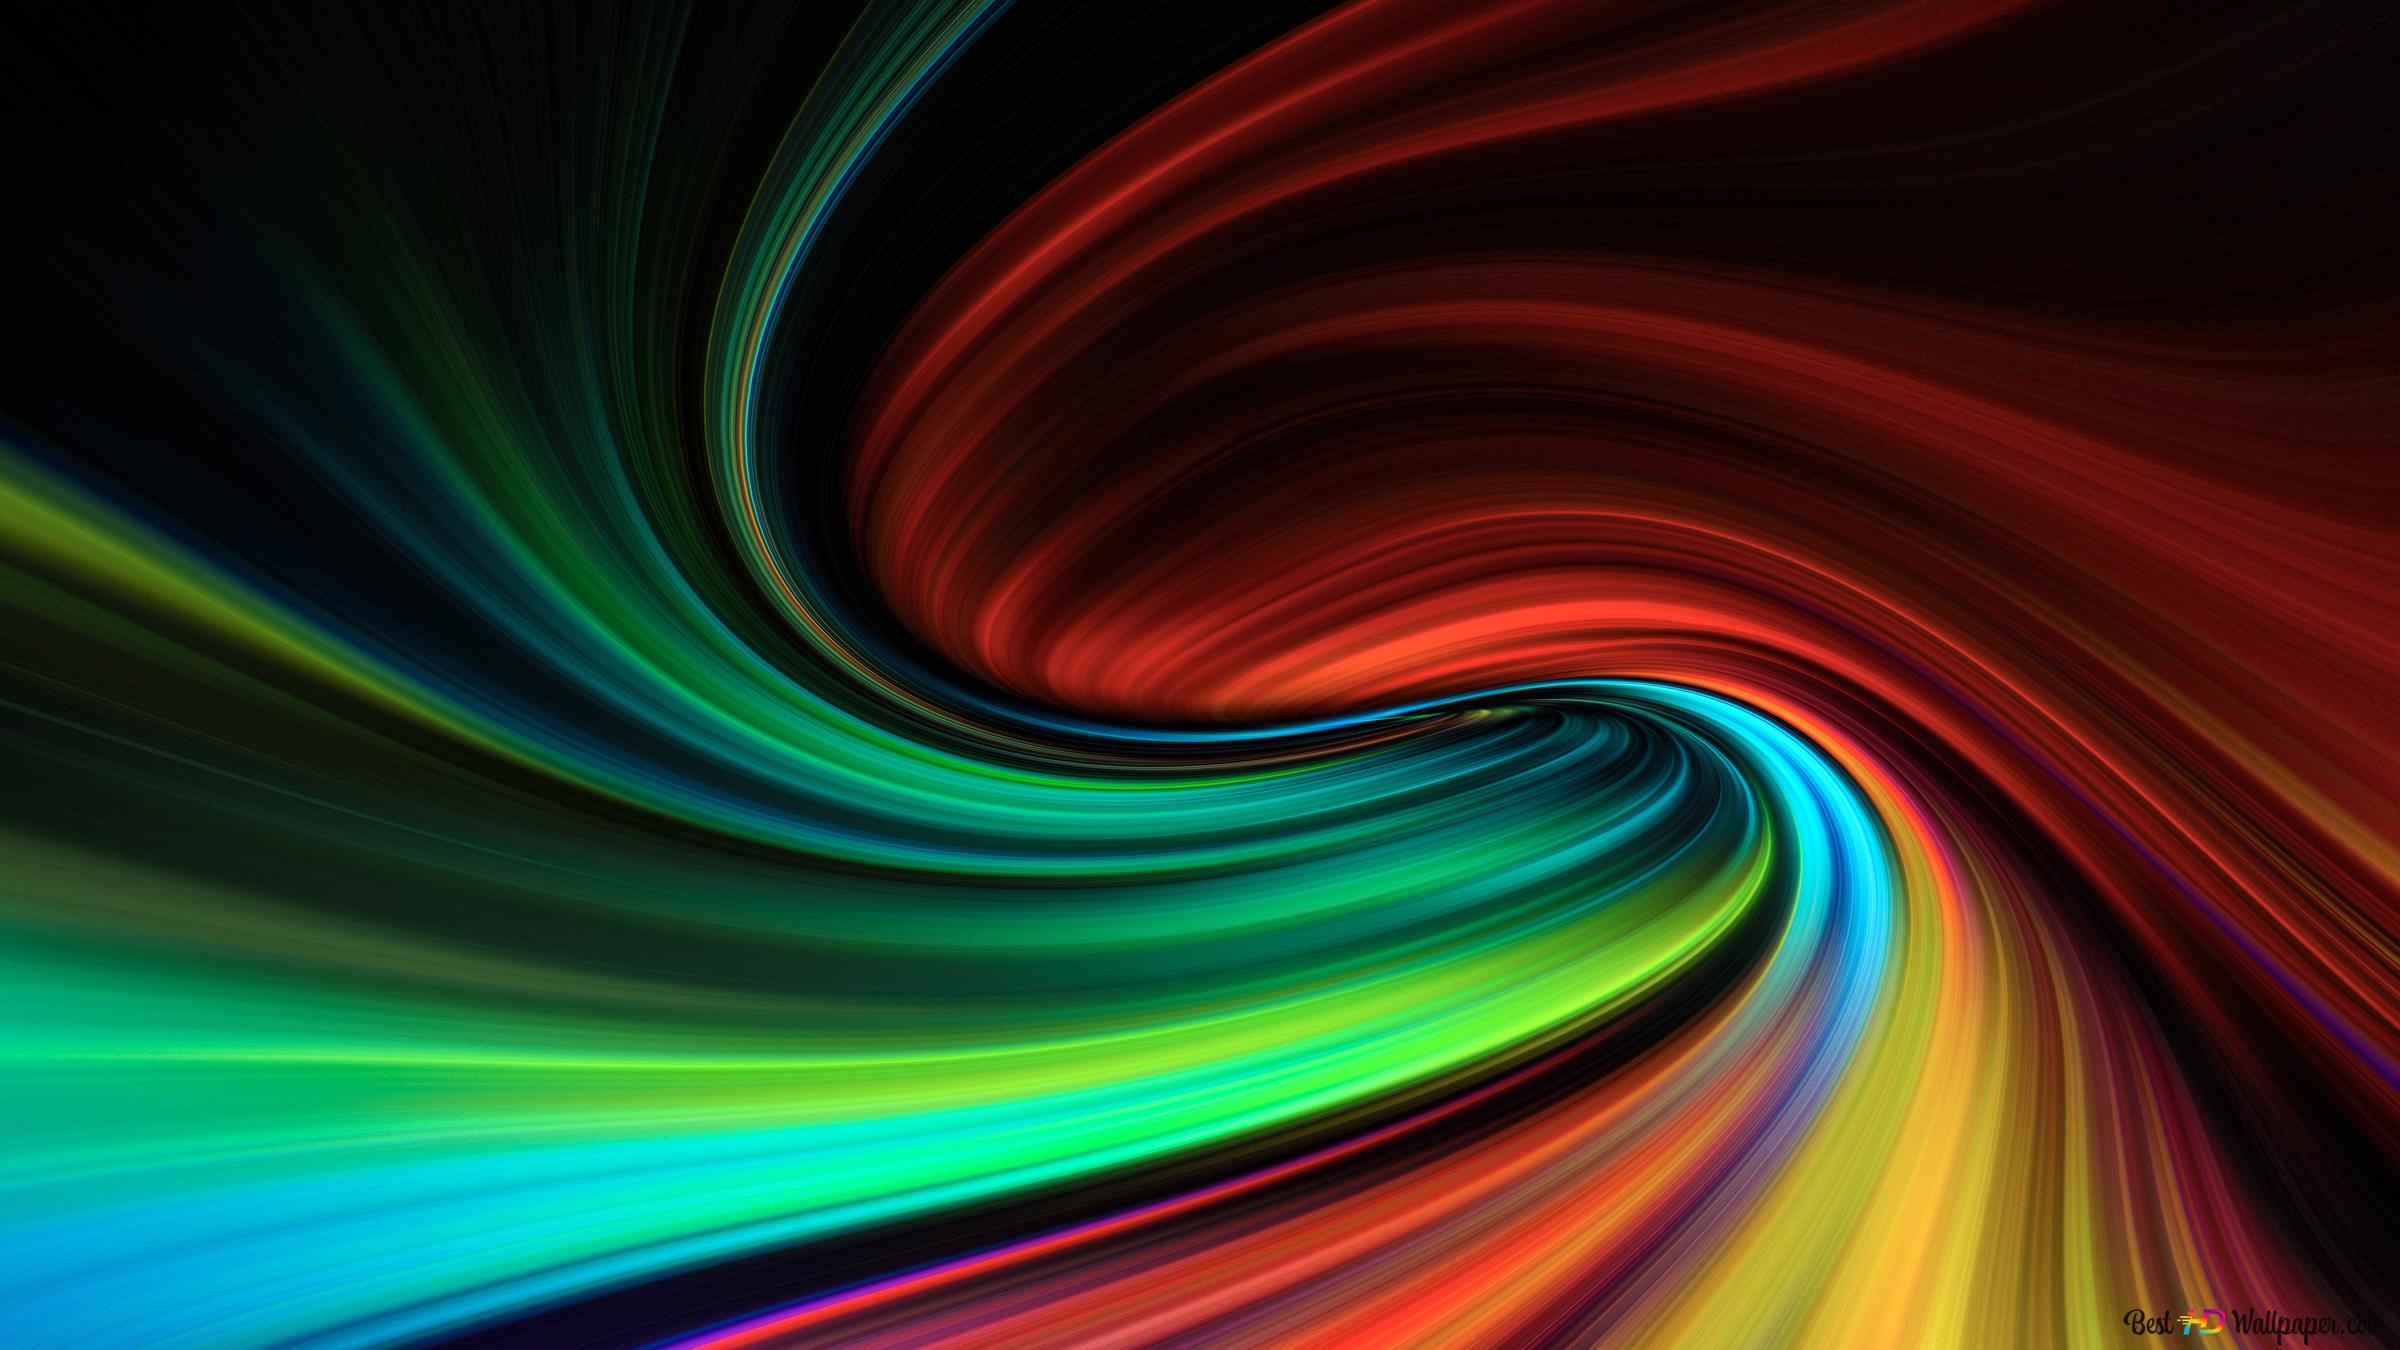 Abstract swirl of green yellow and red colors k wallpaper download